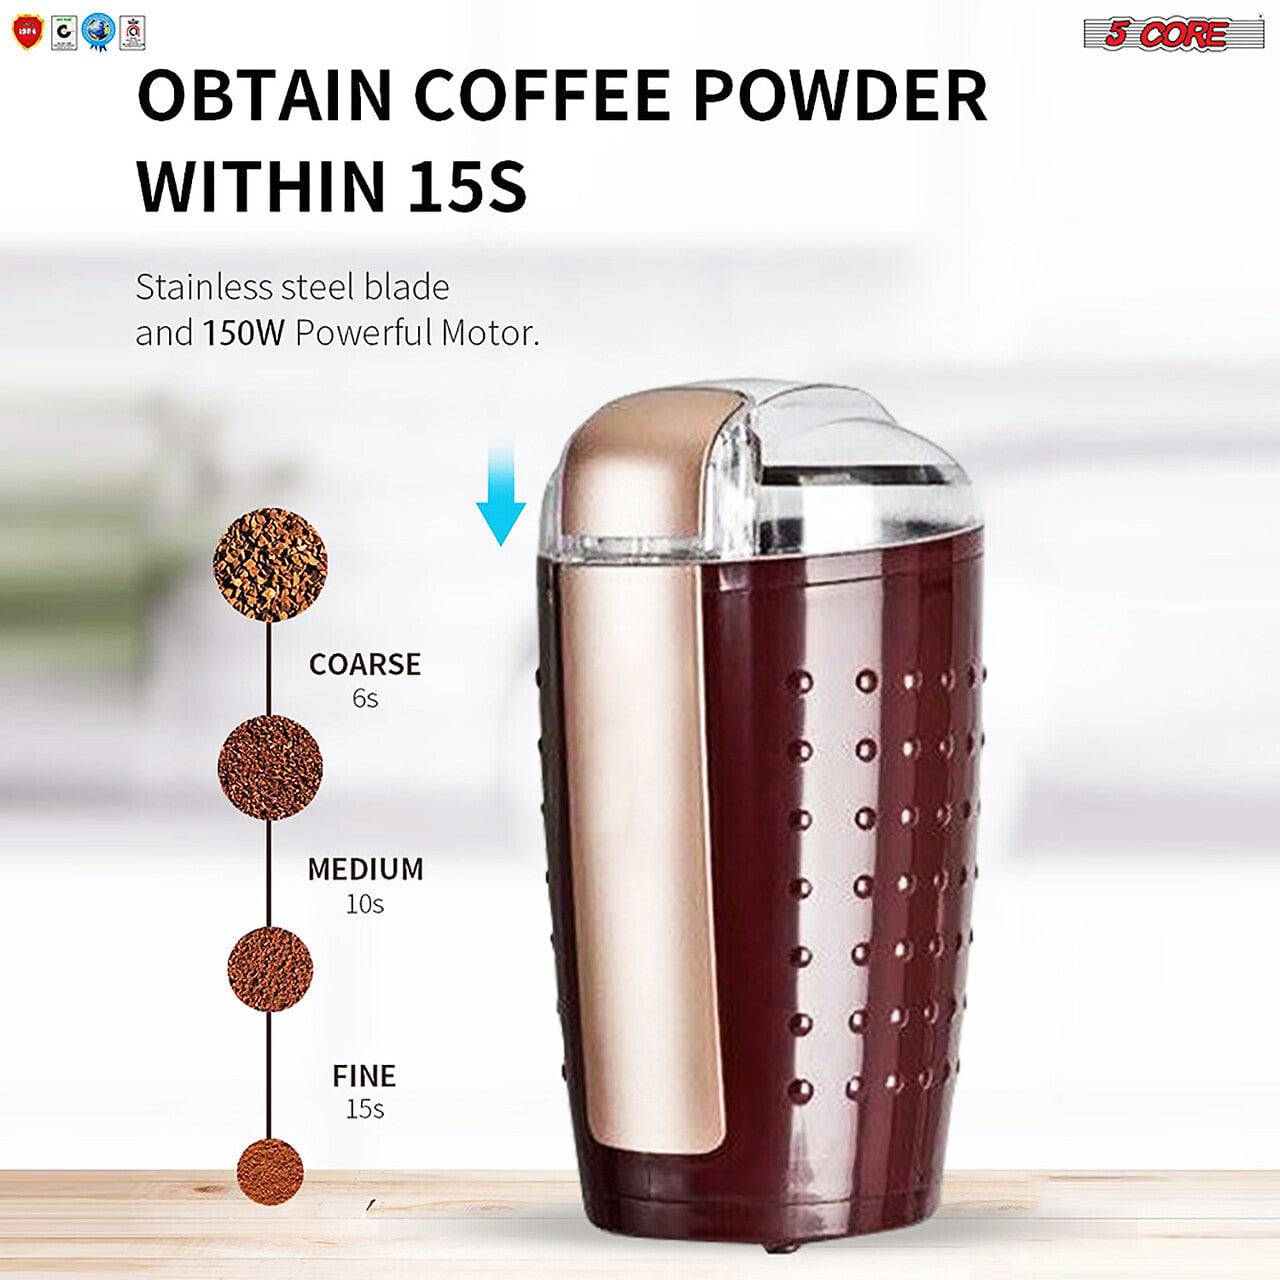 https://res.cloudinary.com/aeropost-inc/image/upload/IMX45W/5-core-coffee-grinders-5-core-electric-coffee-grinder-stainless-steel-4-5oz-capacity-with-easy-on-off-5-core-cg-01-black-brown-37306562347245__757334458.jpg